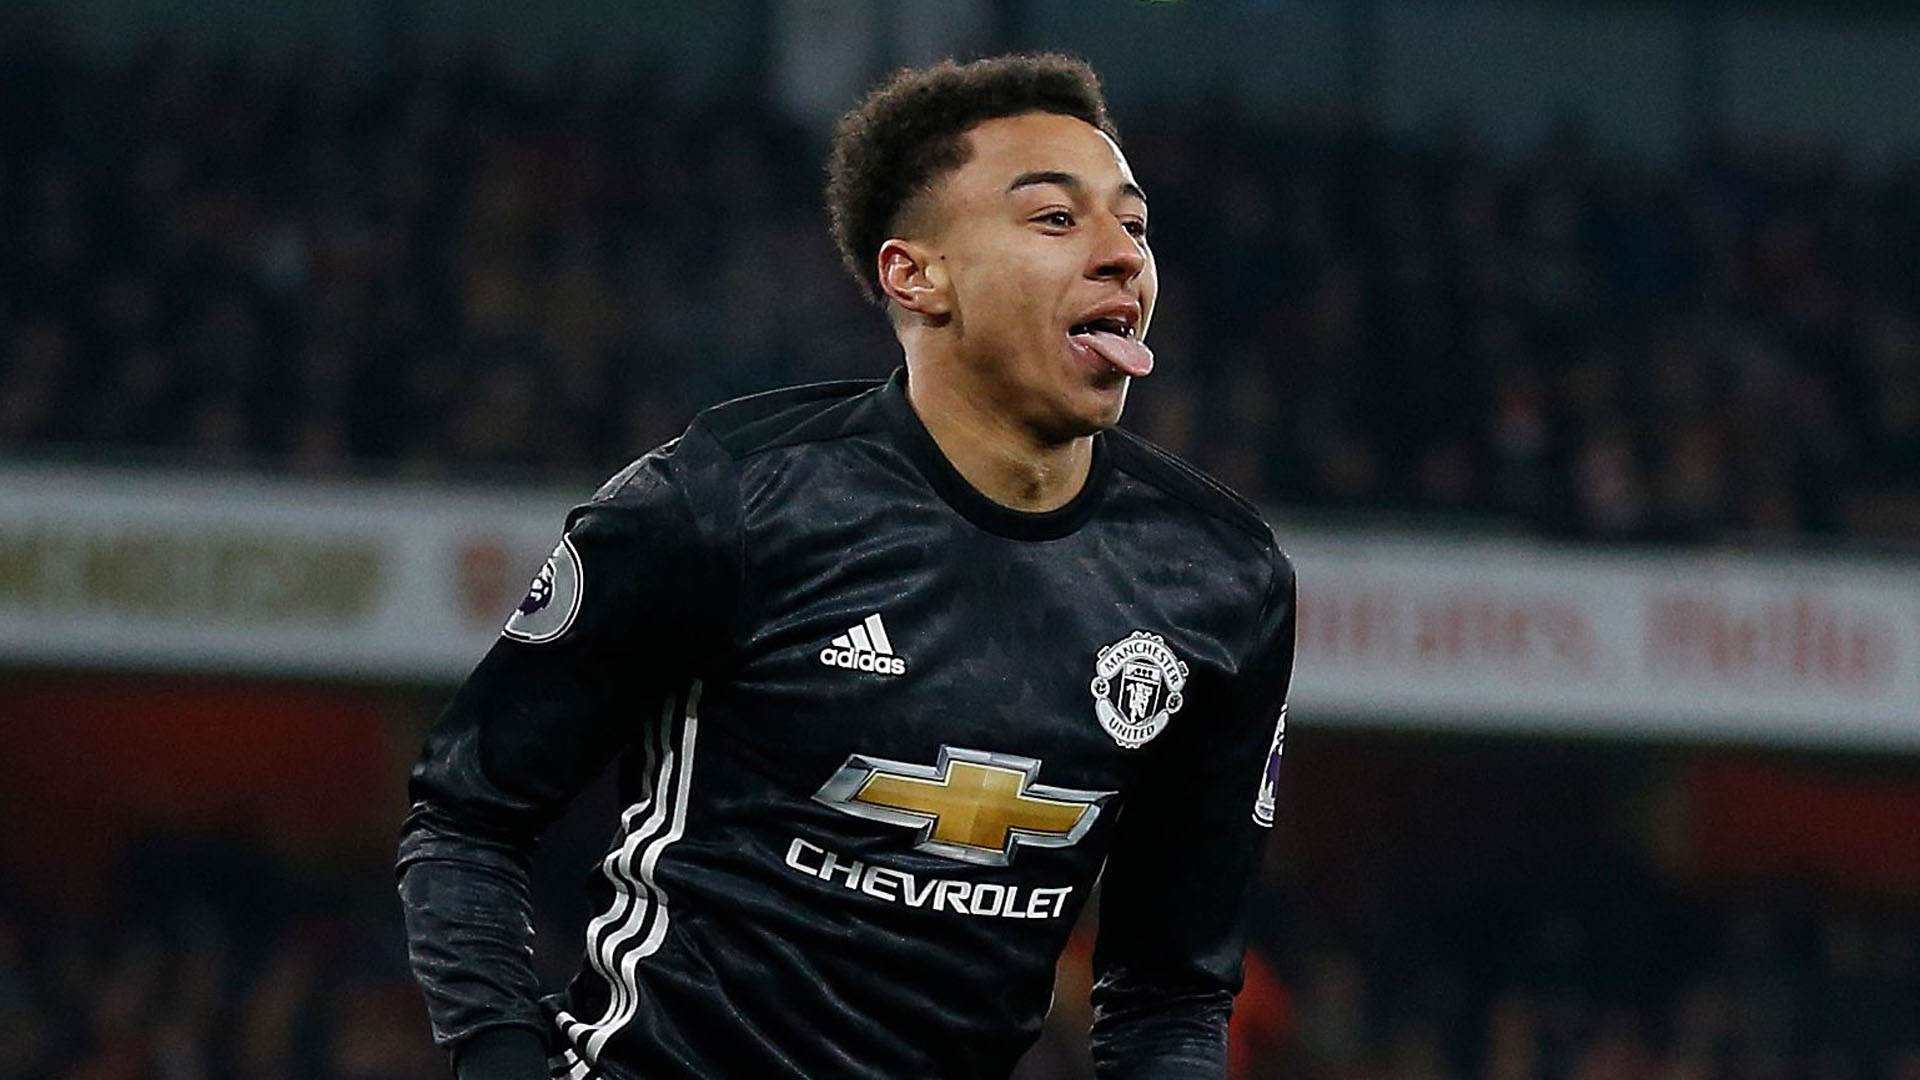  Sheffield United are keen on bringing in an attacking midfielder with Manchester United star Jesse Lingard a target.